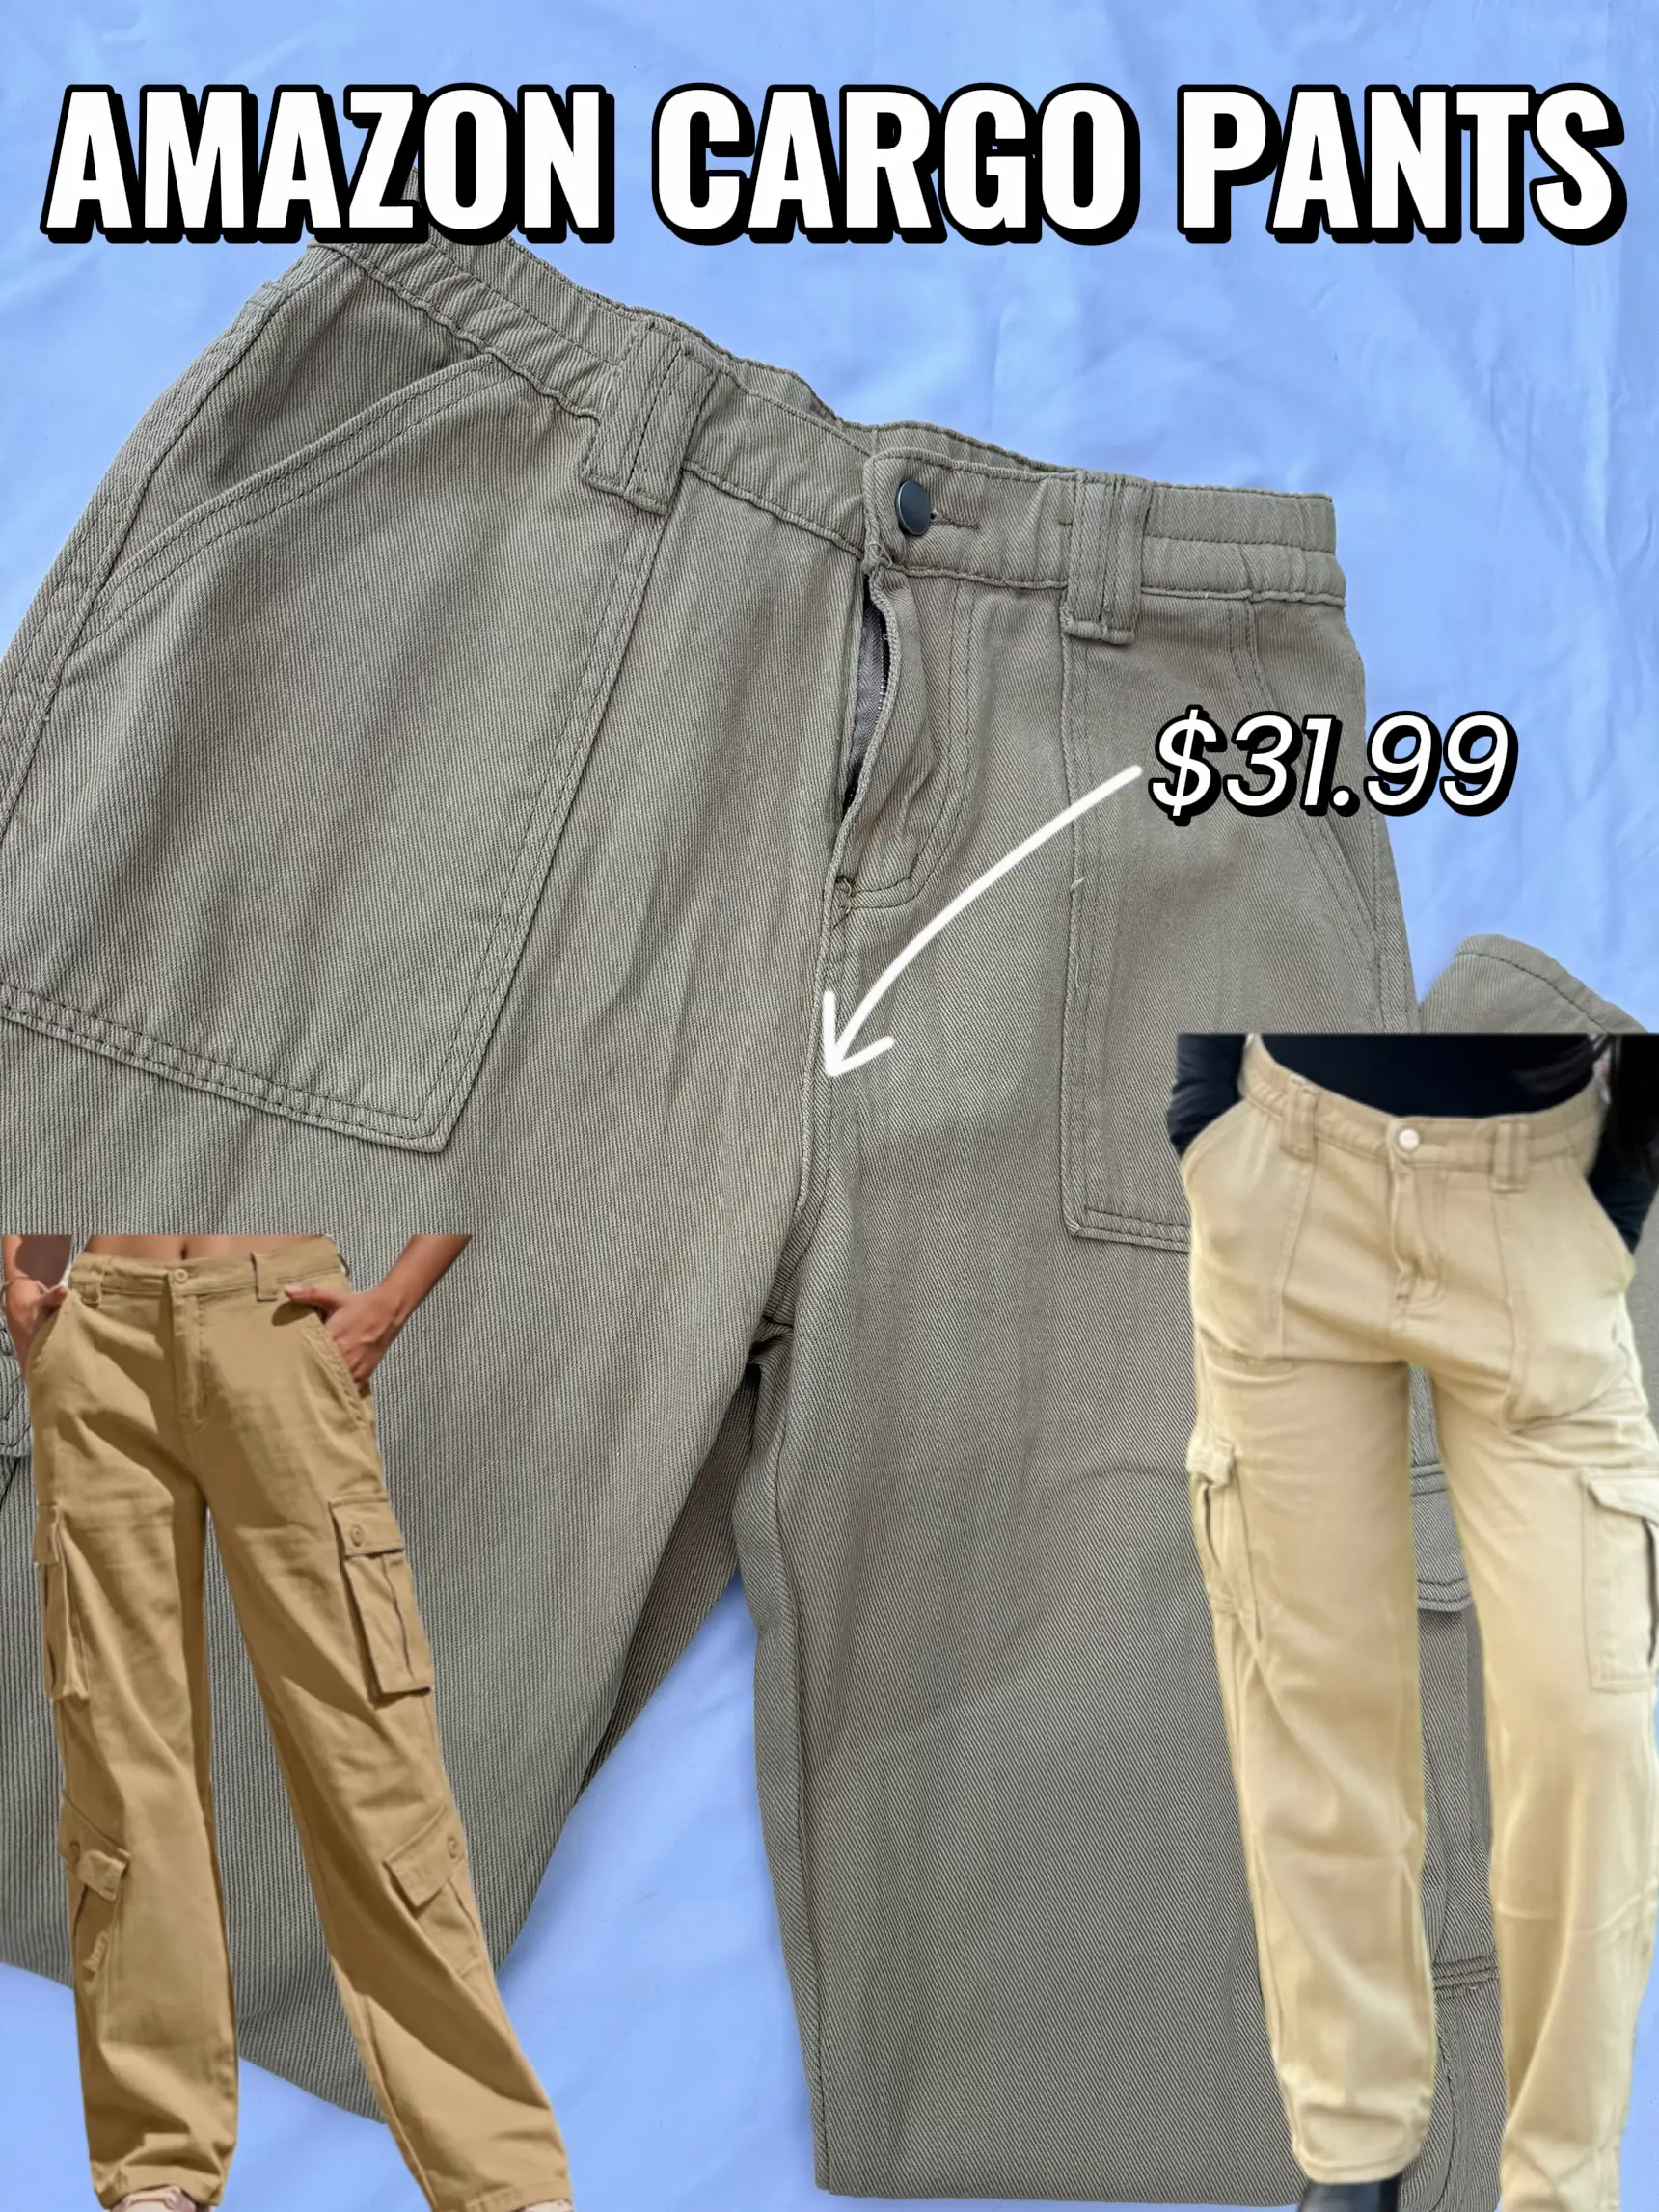 Halara - Cargo pants are seen everywhere on the streets